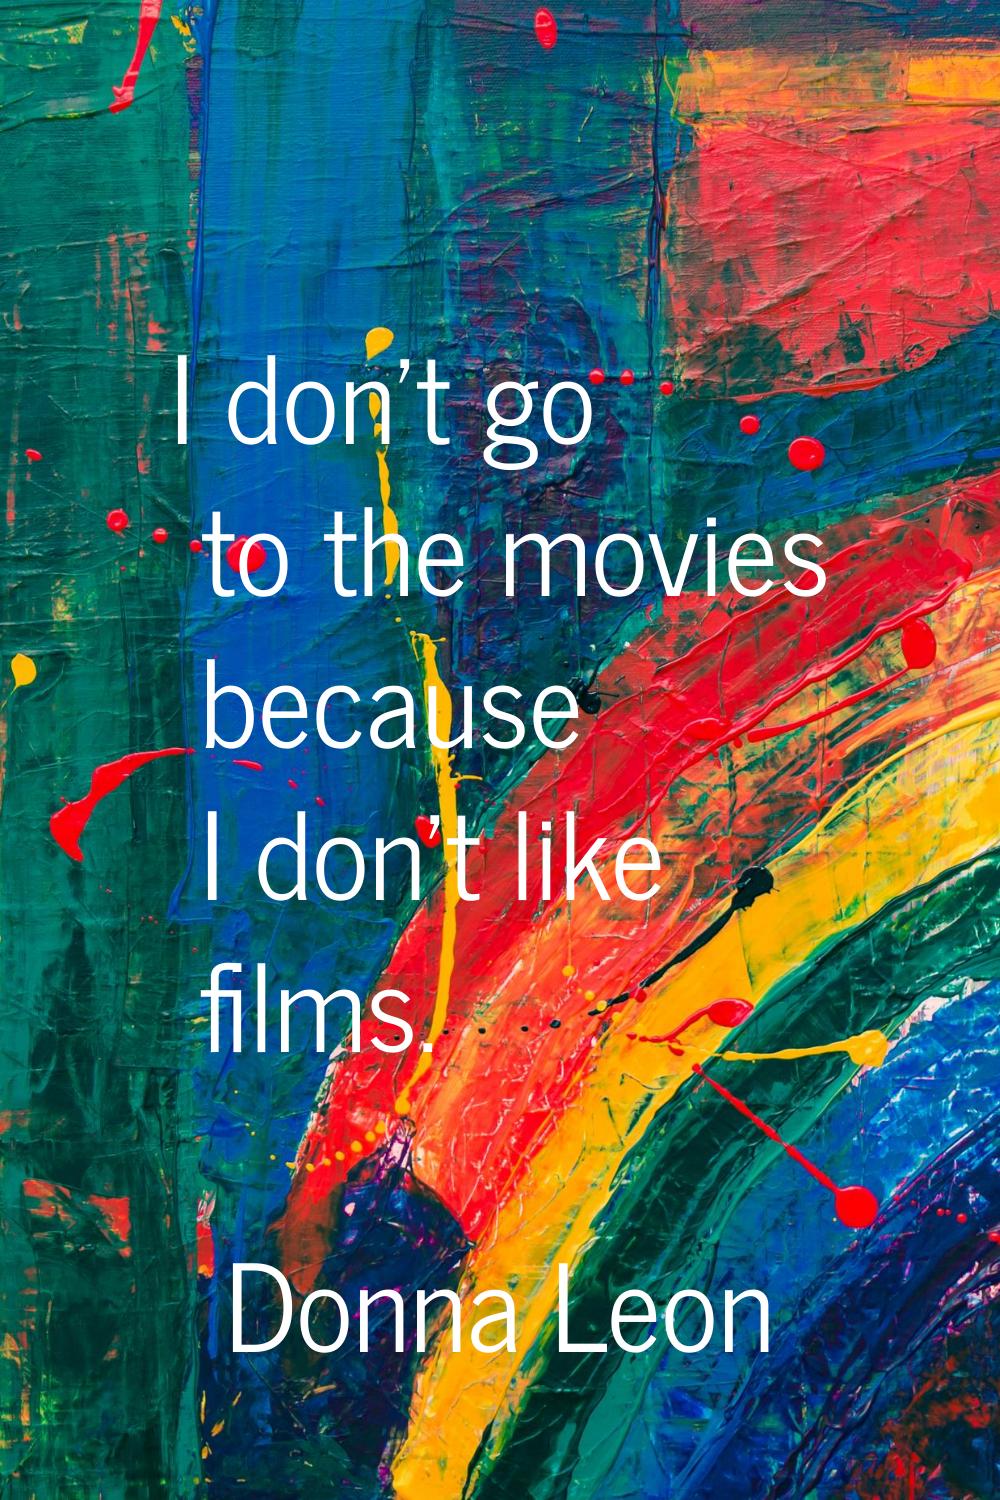 I don't go to the movies because I don't like films.